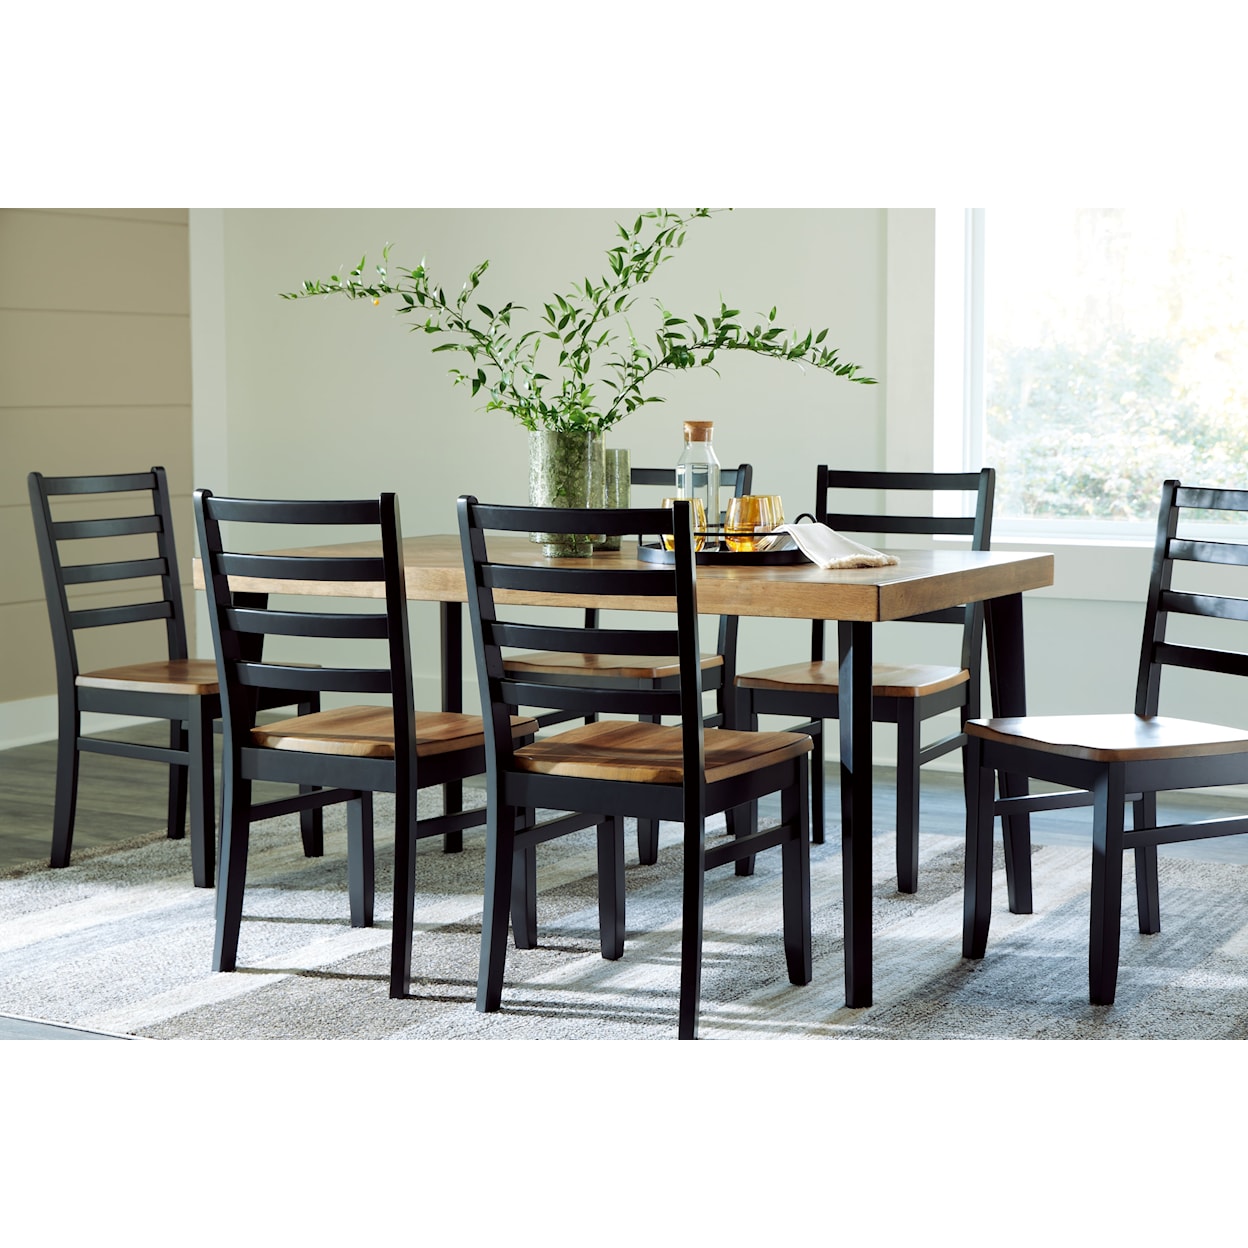 Signature Design by Ashley Blondon Dining Table And 6 Chairs (Set Of 7)